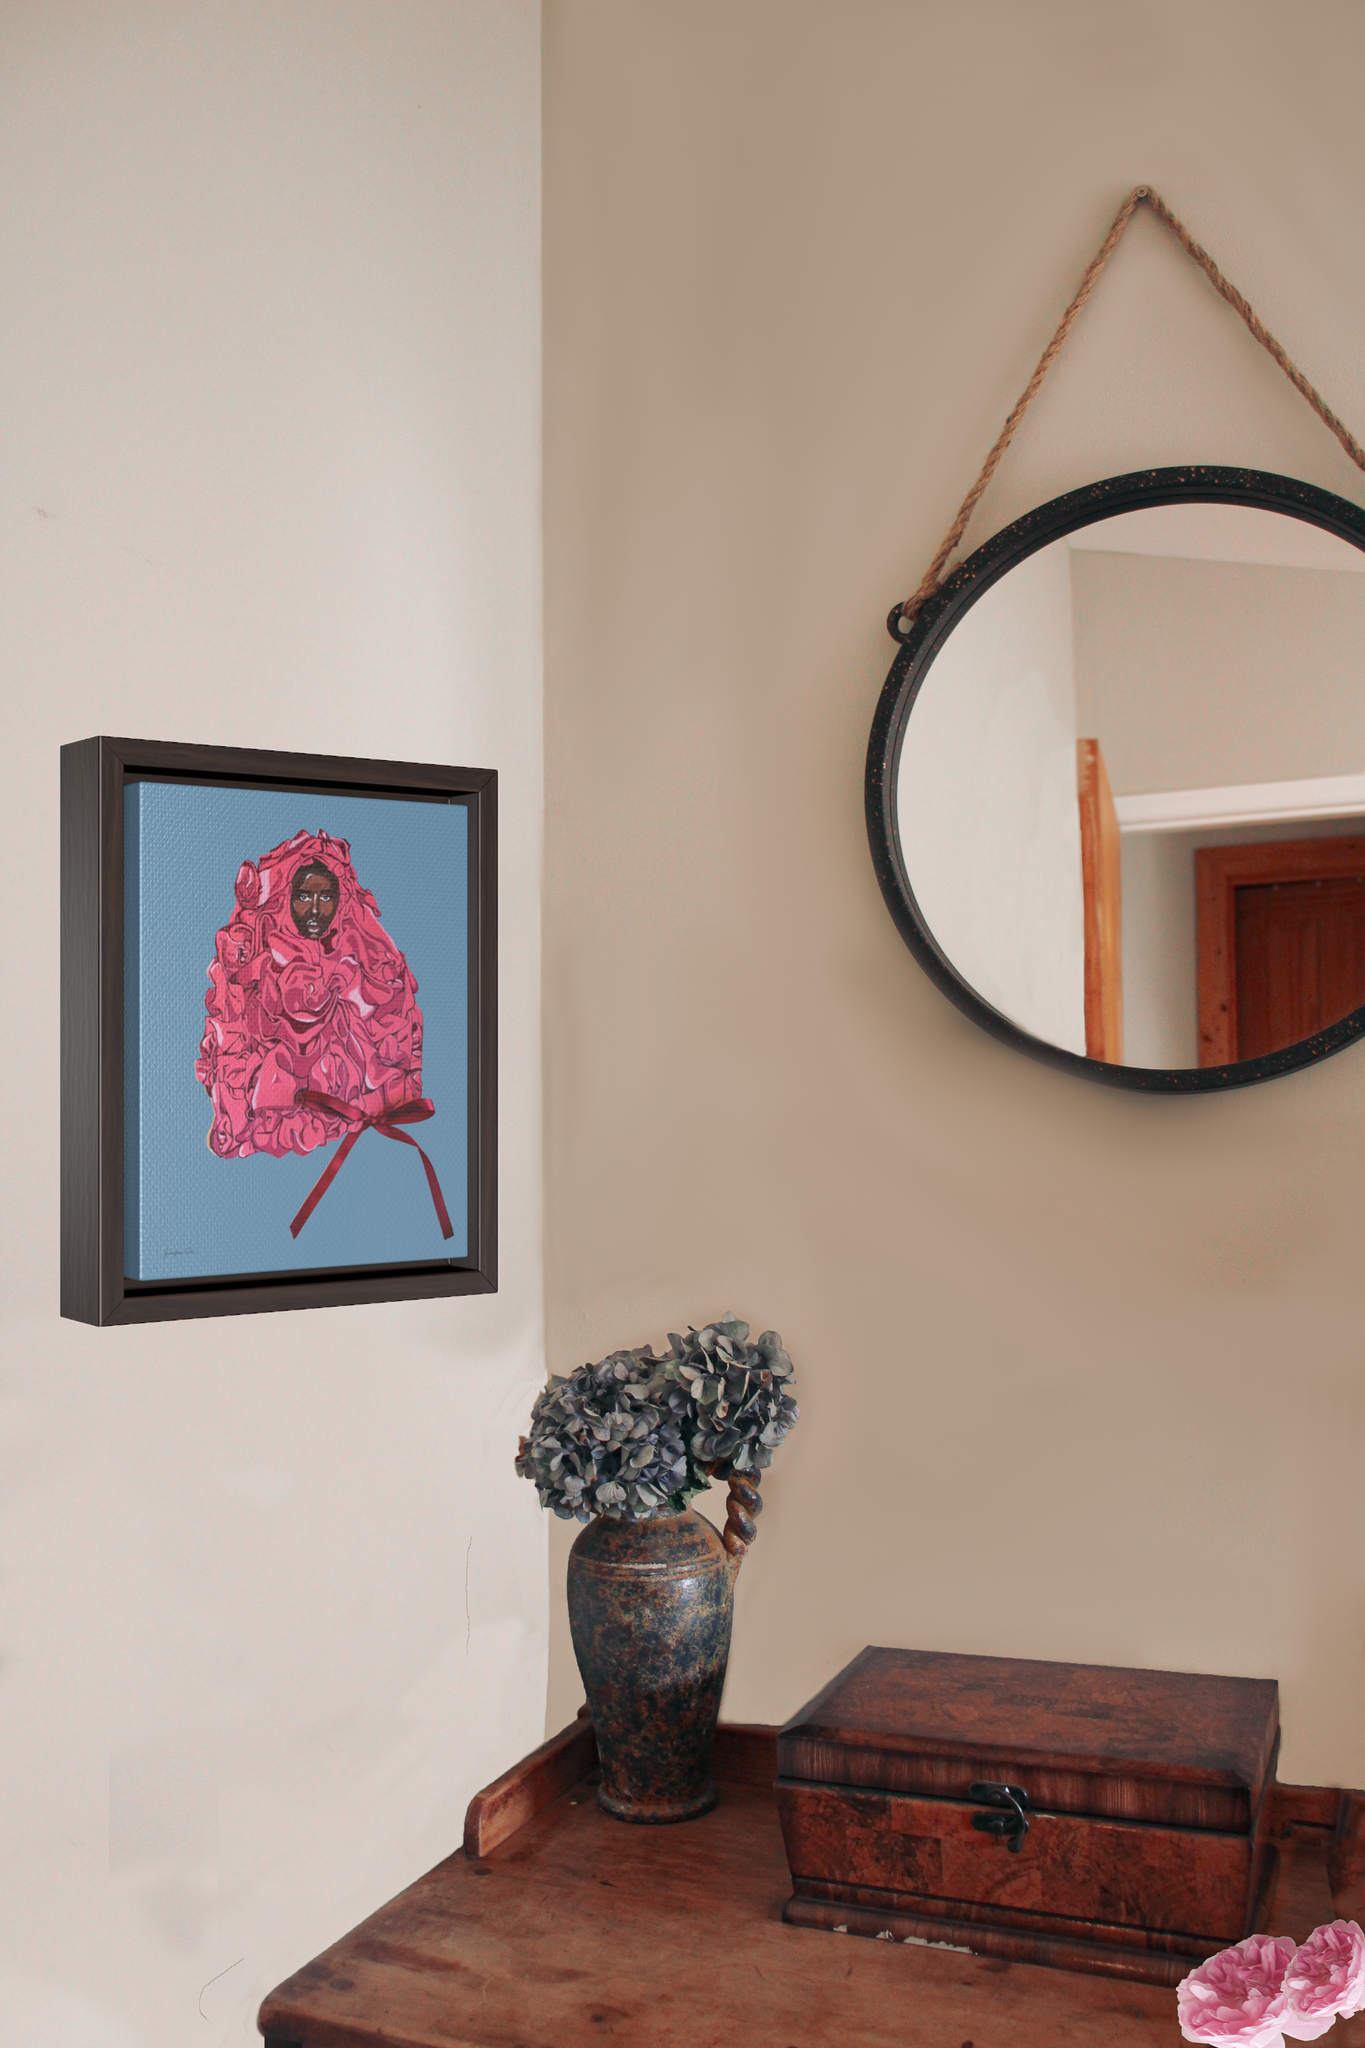 A framed gallery wrap canvas, with an illustration of model Adut Akech wearing a pink Valentino gown with a bow, with a light blue background, hanging on a wall next to a desk with a vase of flowers and a jewelry box